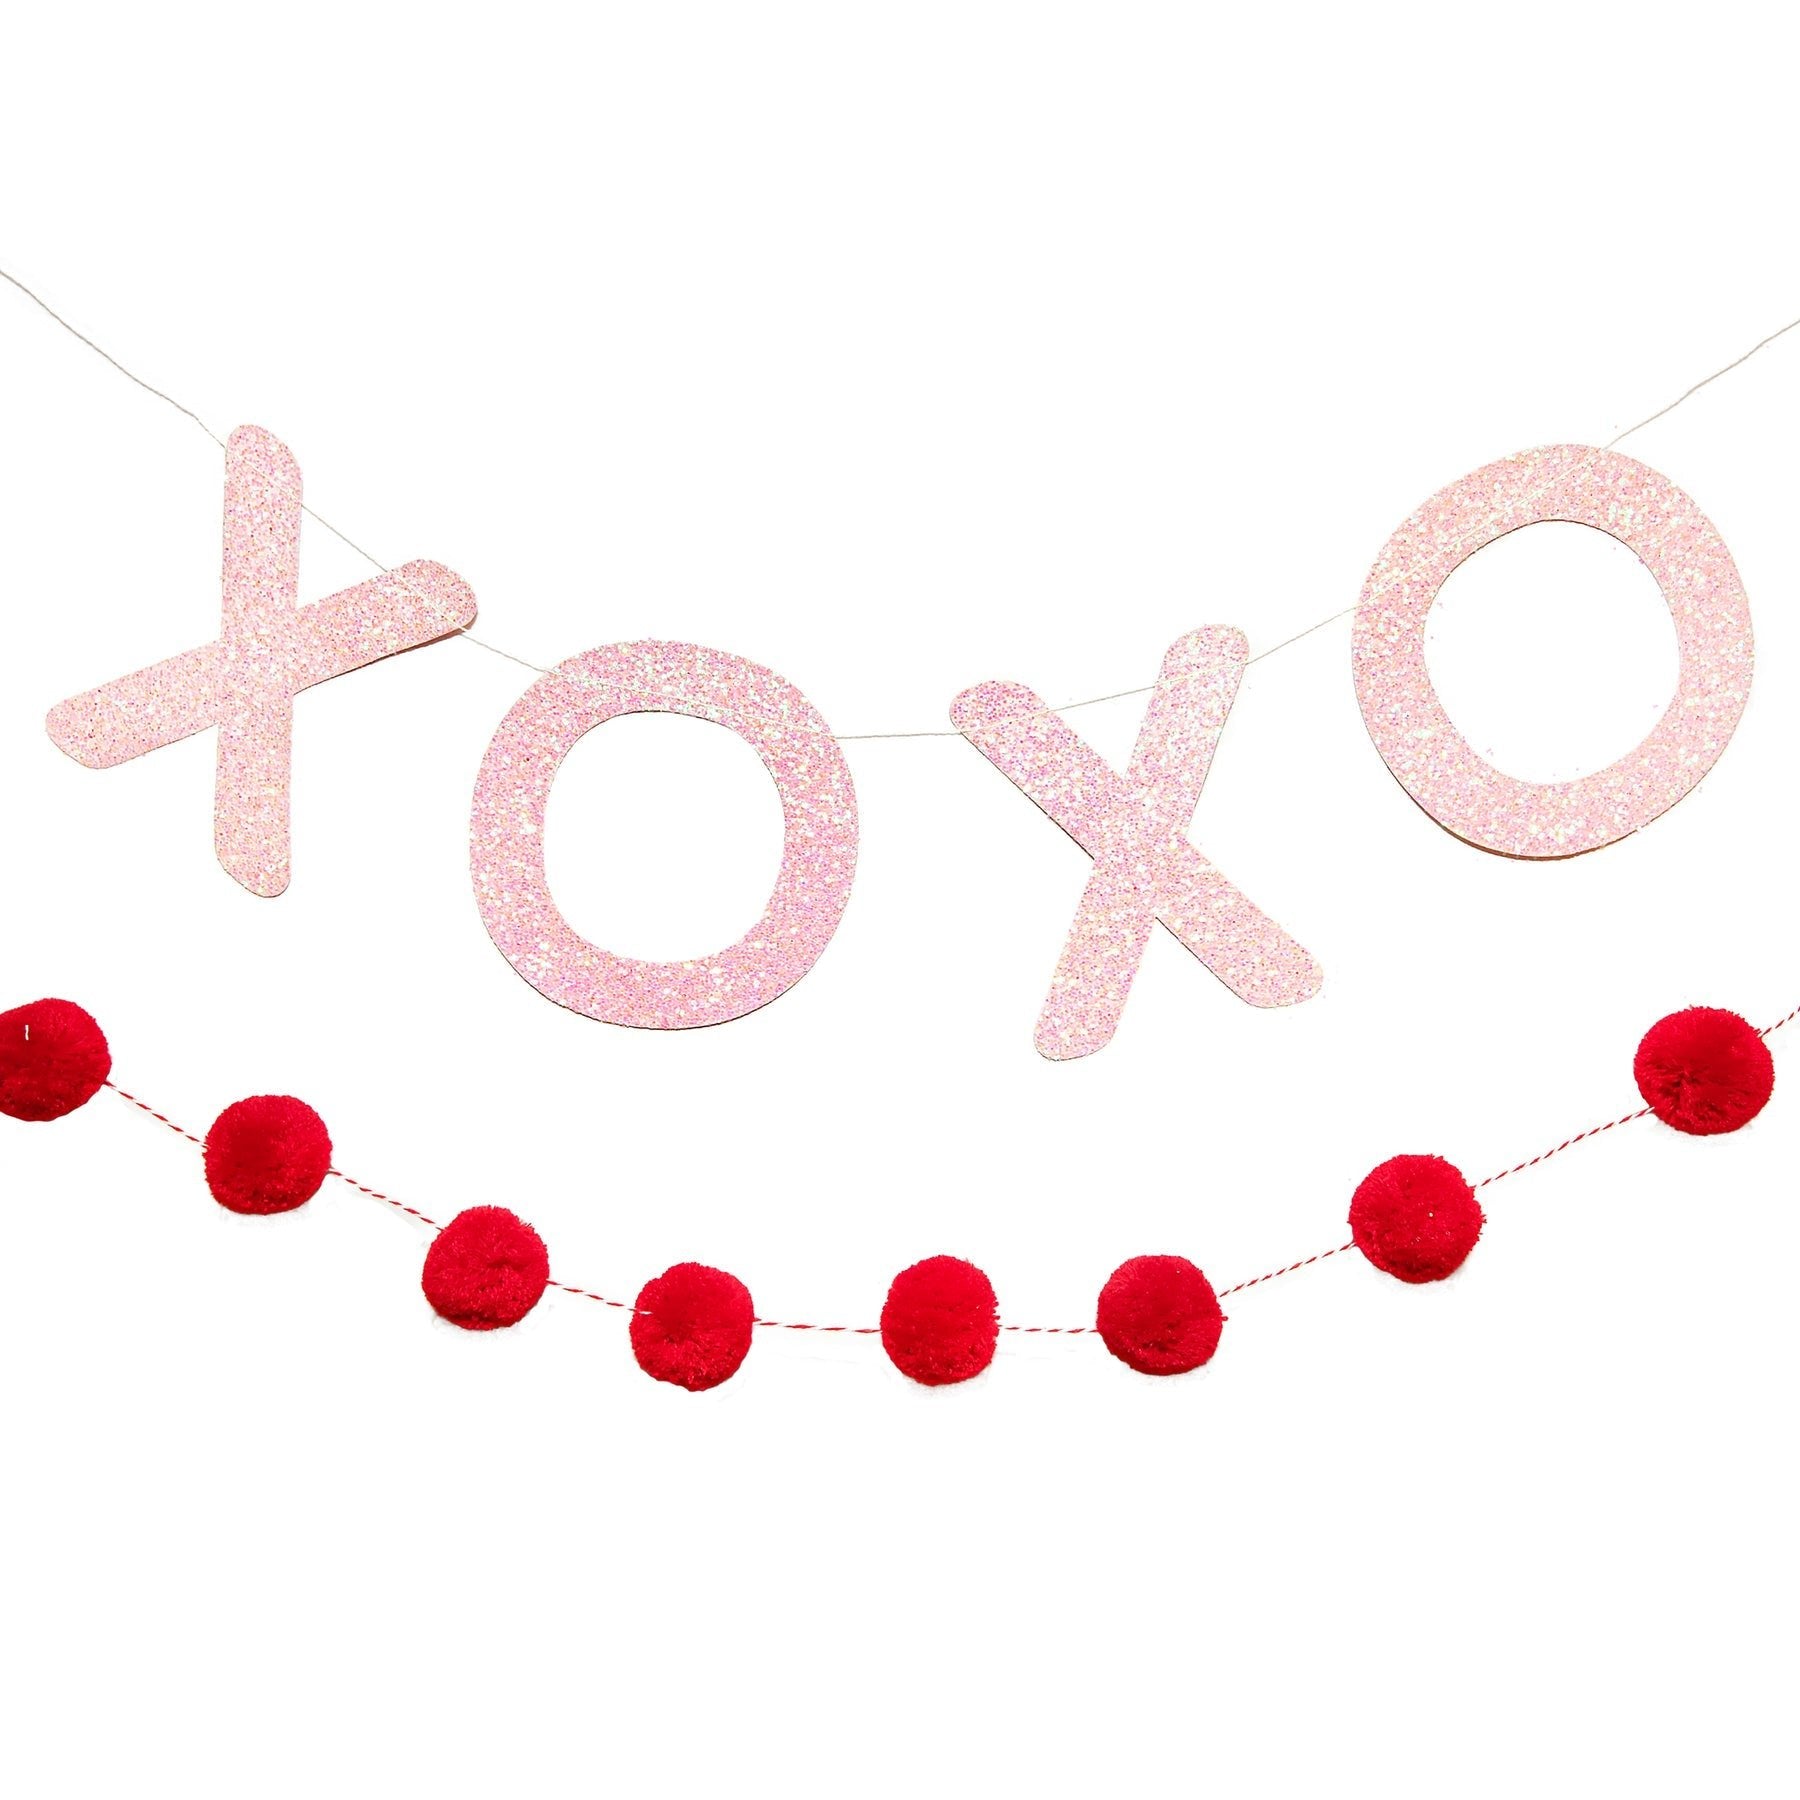 XOXO Banner Set - Oh My Darling Party Co-bannerbannersFaire #Fringe_Backdrop#